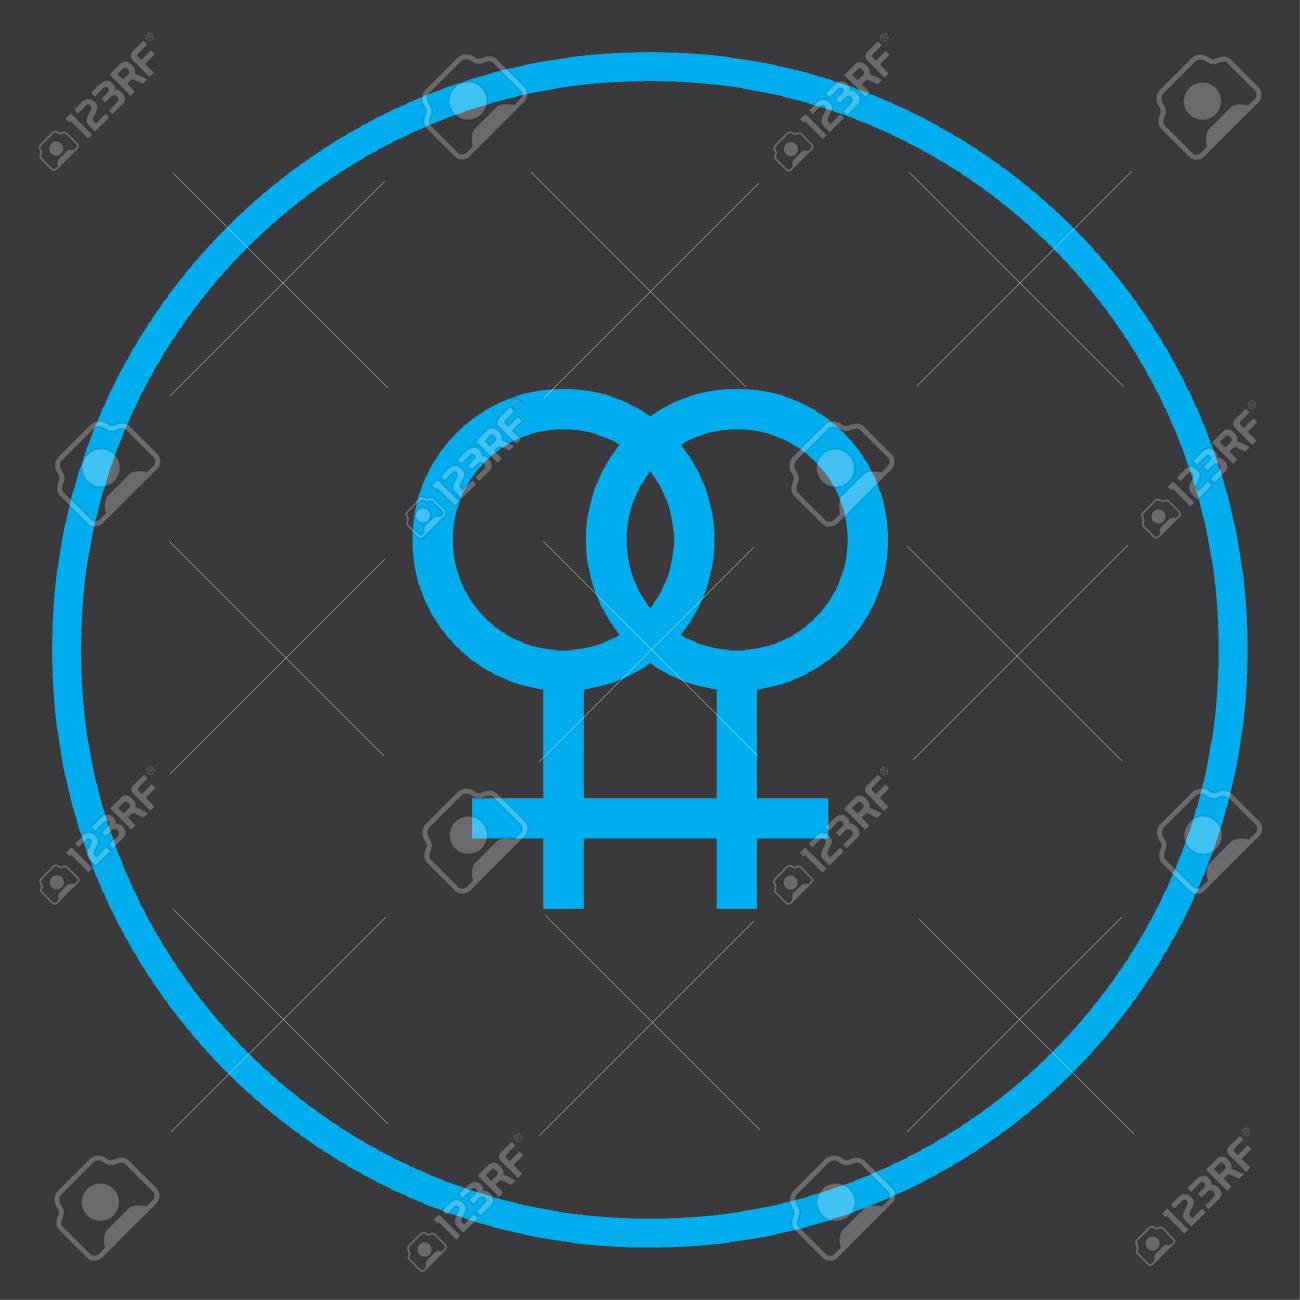 pictures of lesbian circle